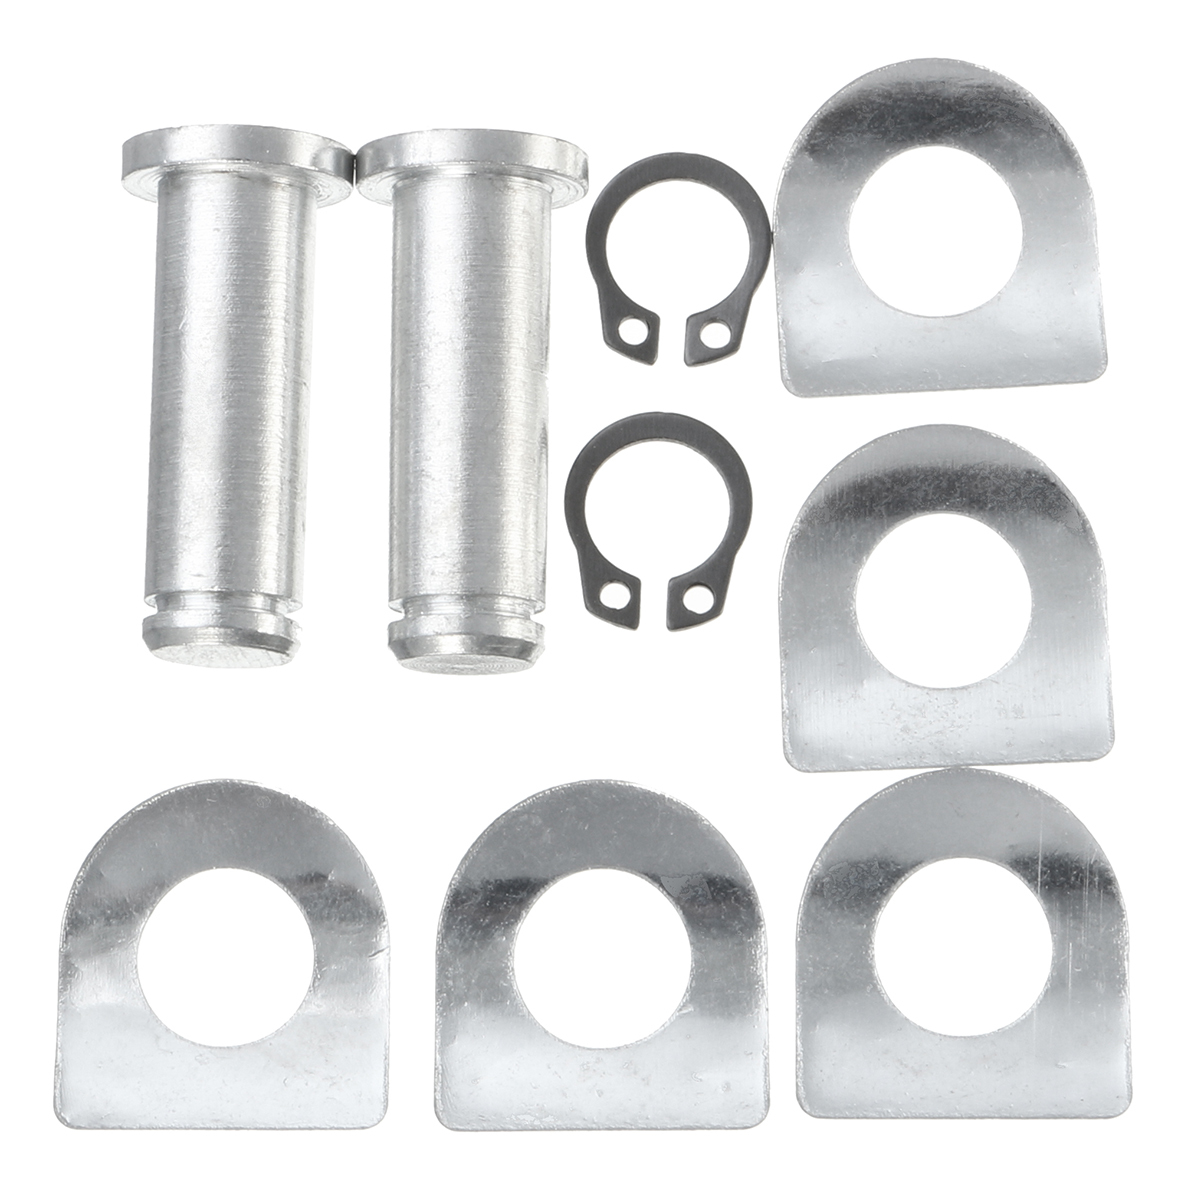 Motorcycle Foot Pedal Peg Mount Screw Kit For Harley Dyna Sportster 883 1200 2